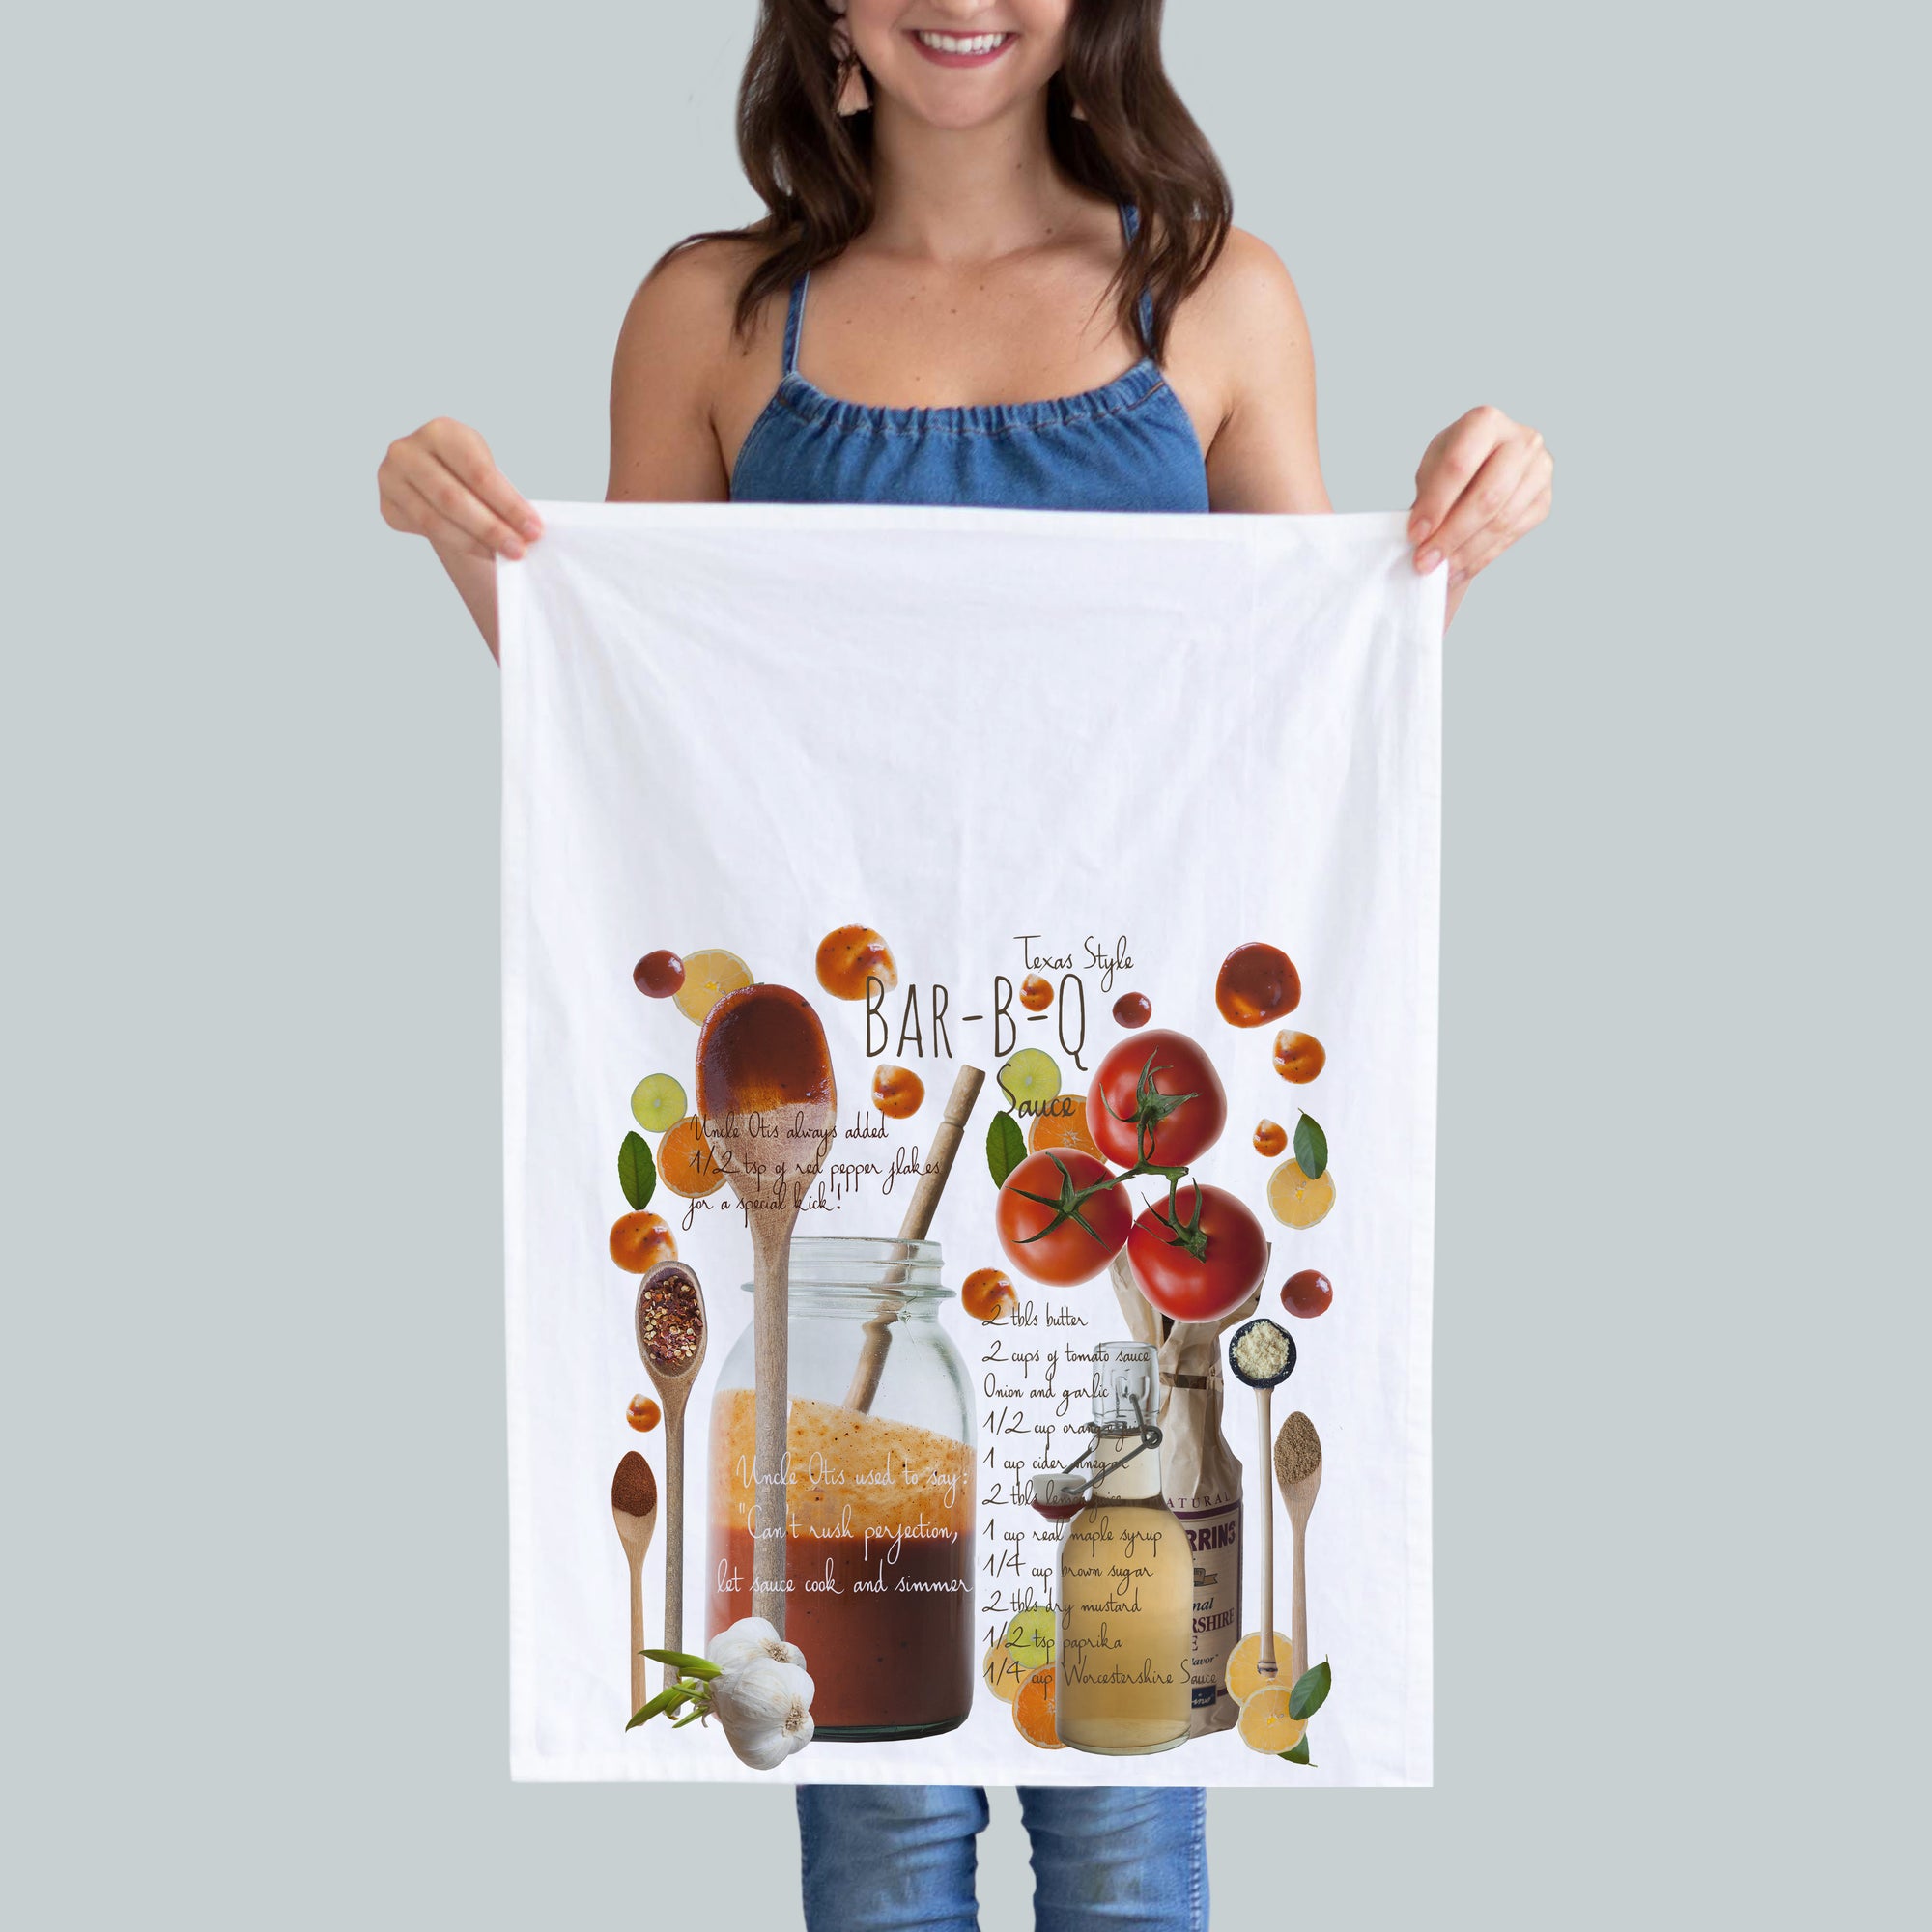 Personalized Kitchen Towels for a Wannabe Cooking Show Host